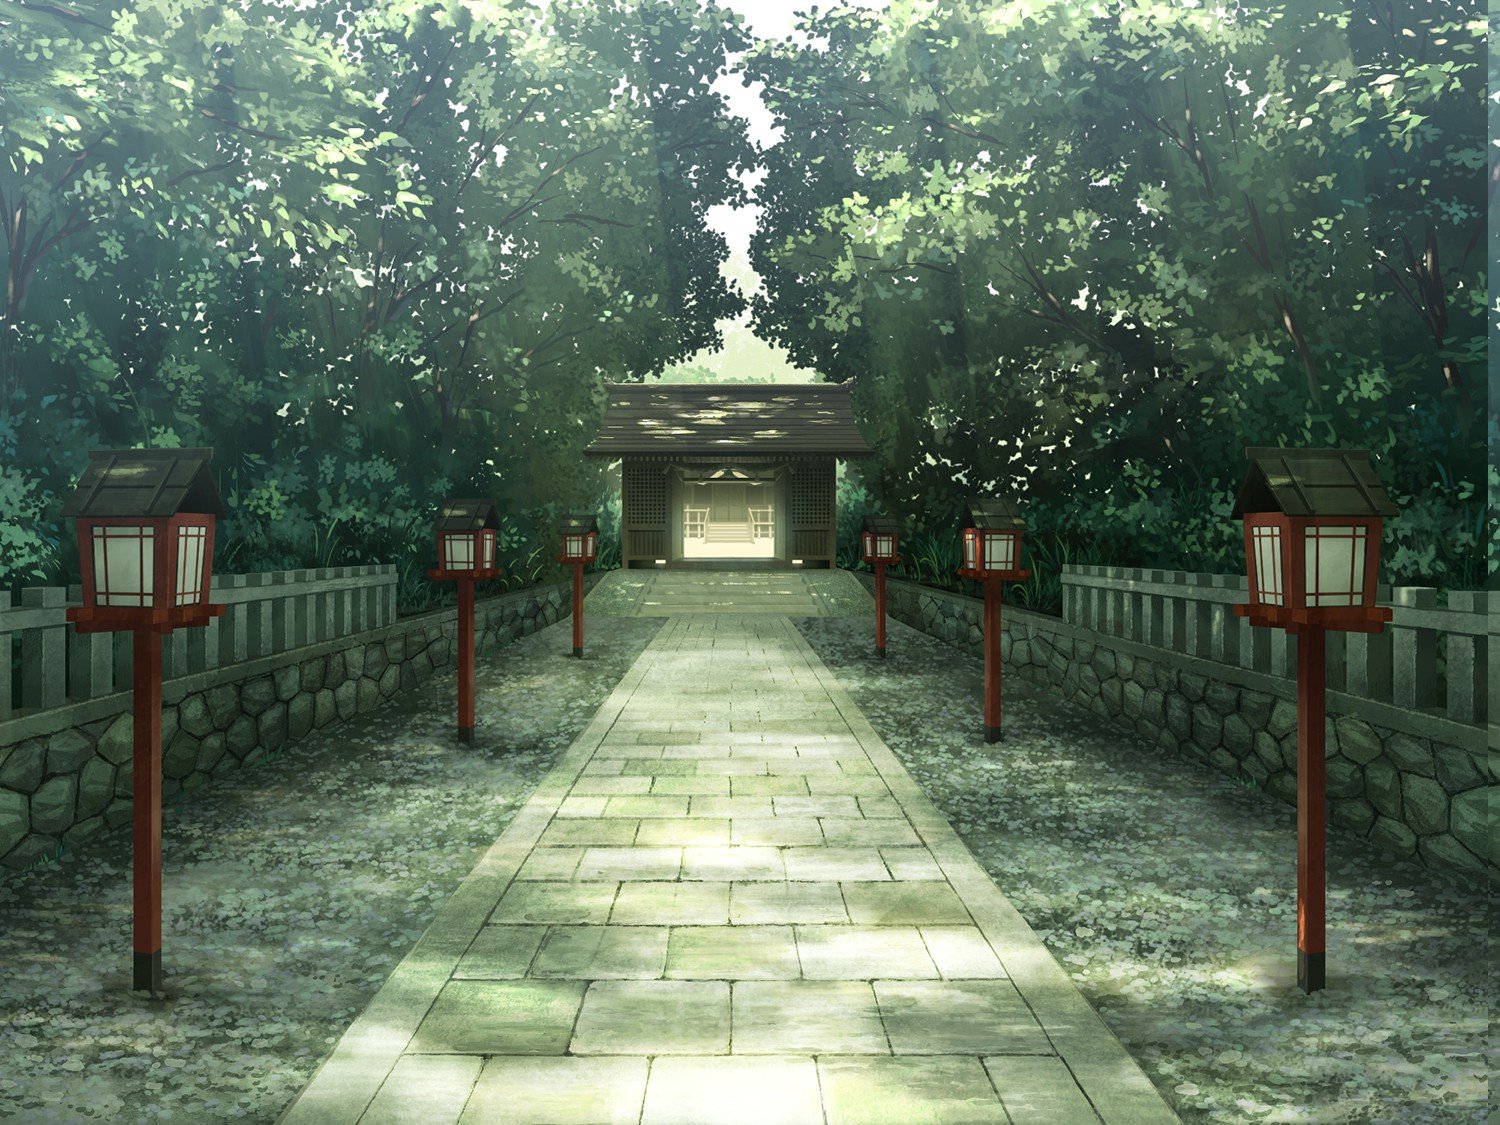 1,126 Anime Temple Images, Stock Photos & Vectors | Shutterstock